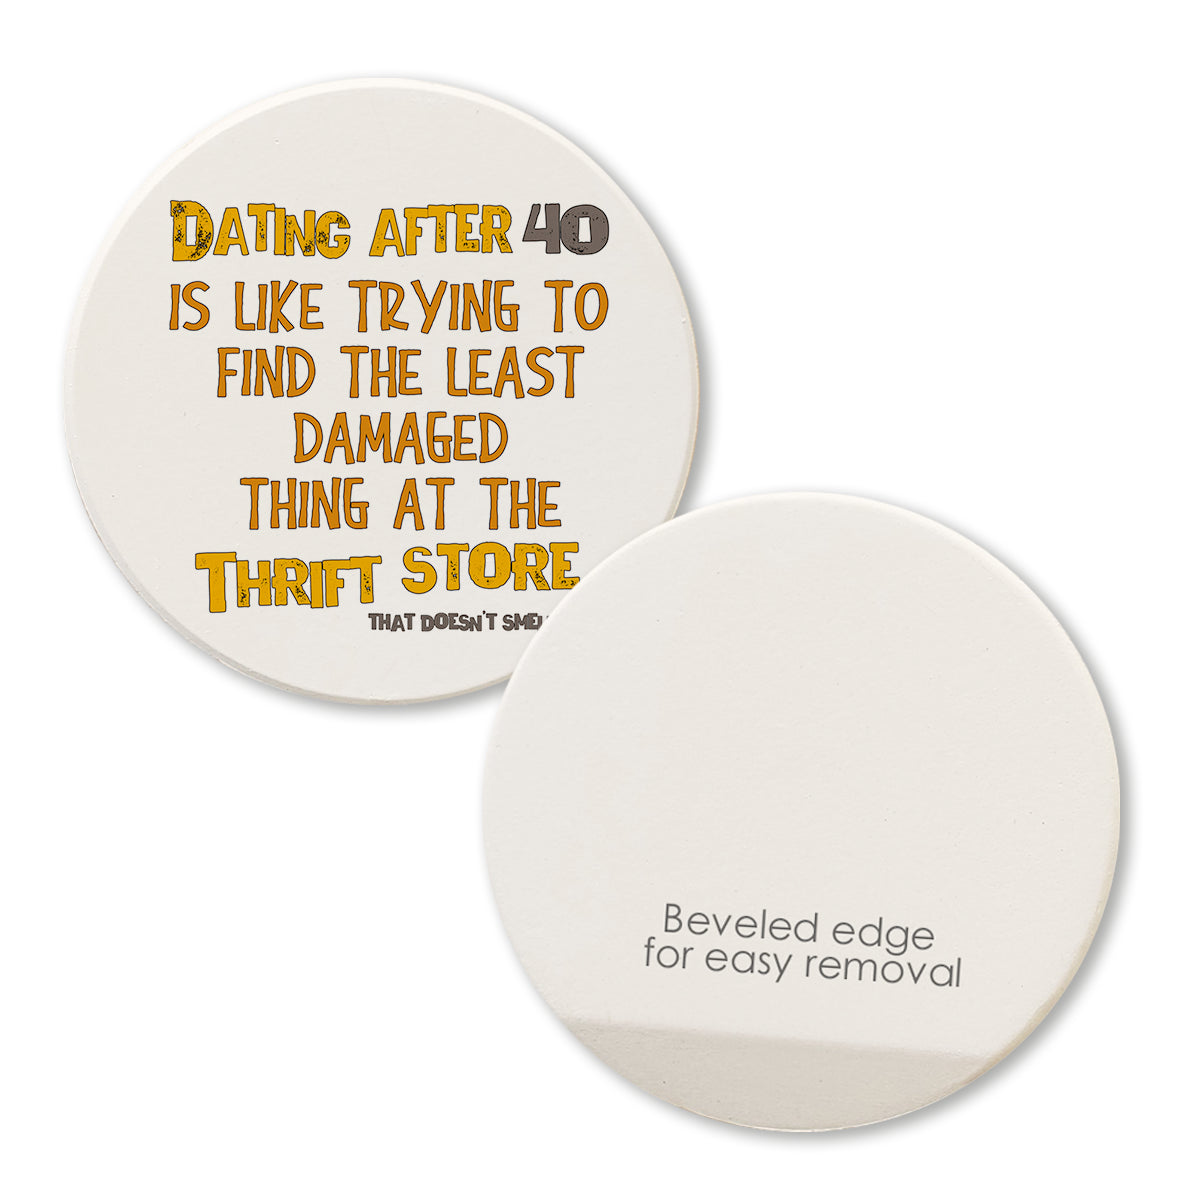 "Dating after 40" Round Car Coaster